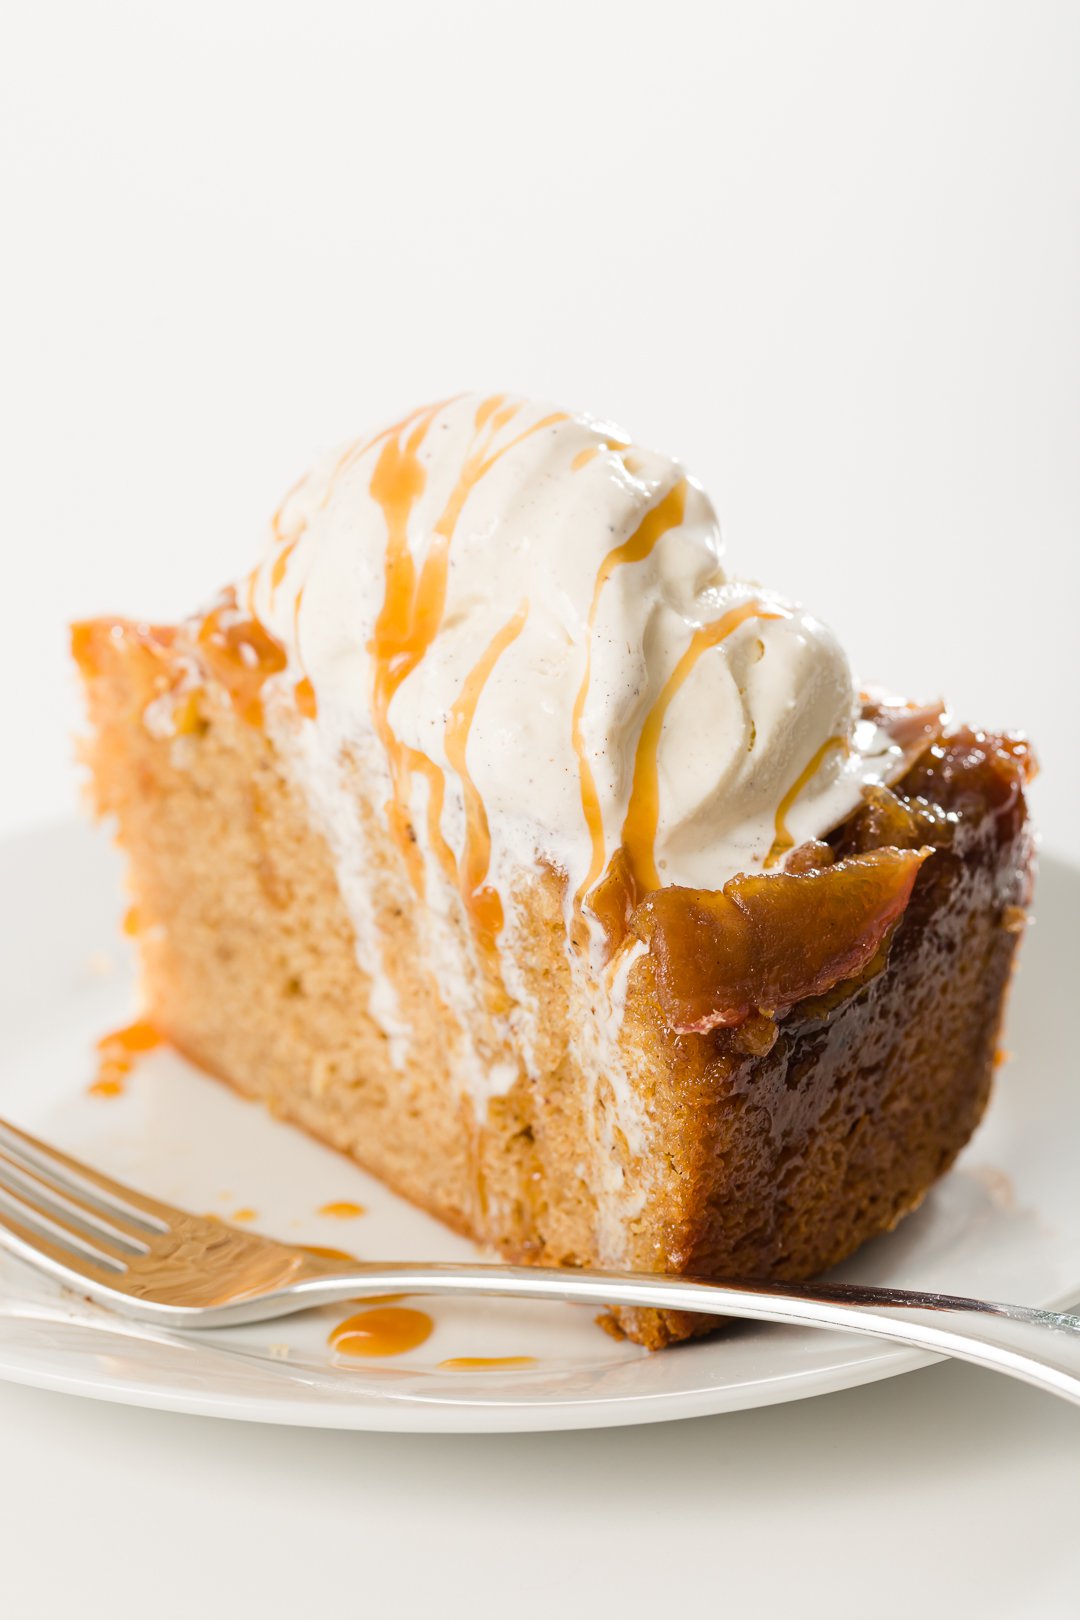 A slice of apple upside-down cake topped with ice cream with caramel drizzled on top